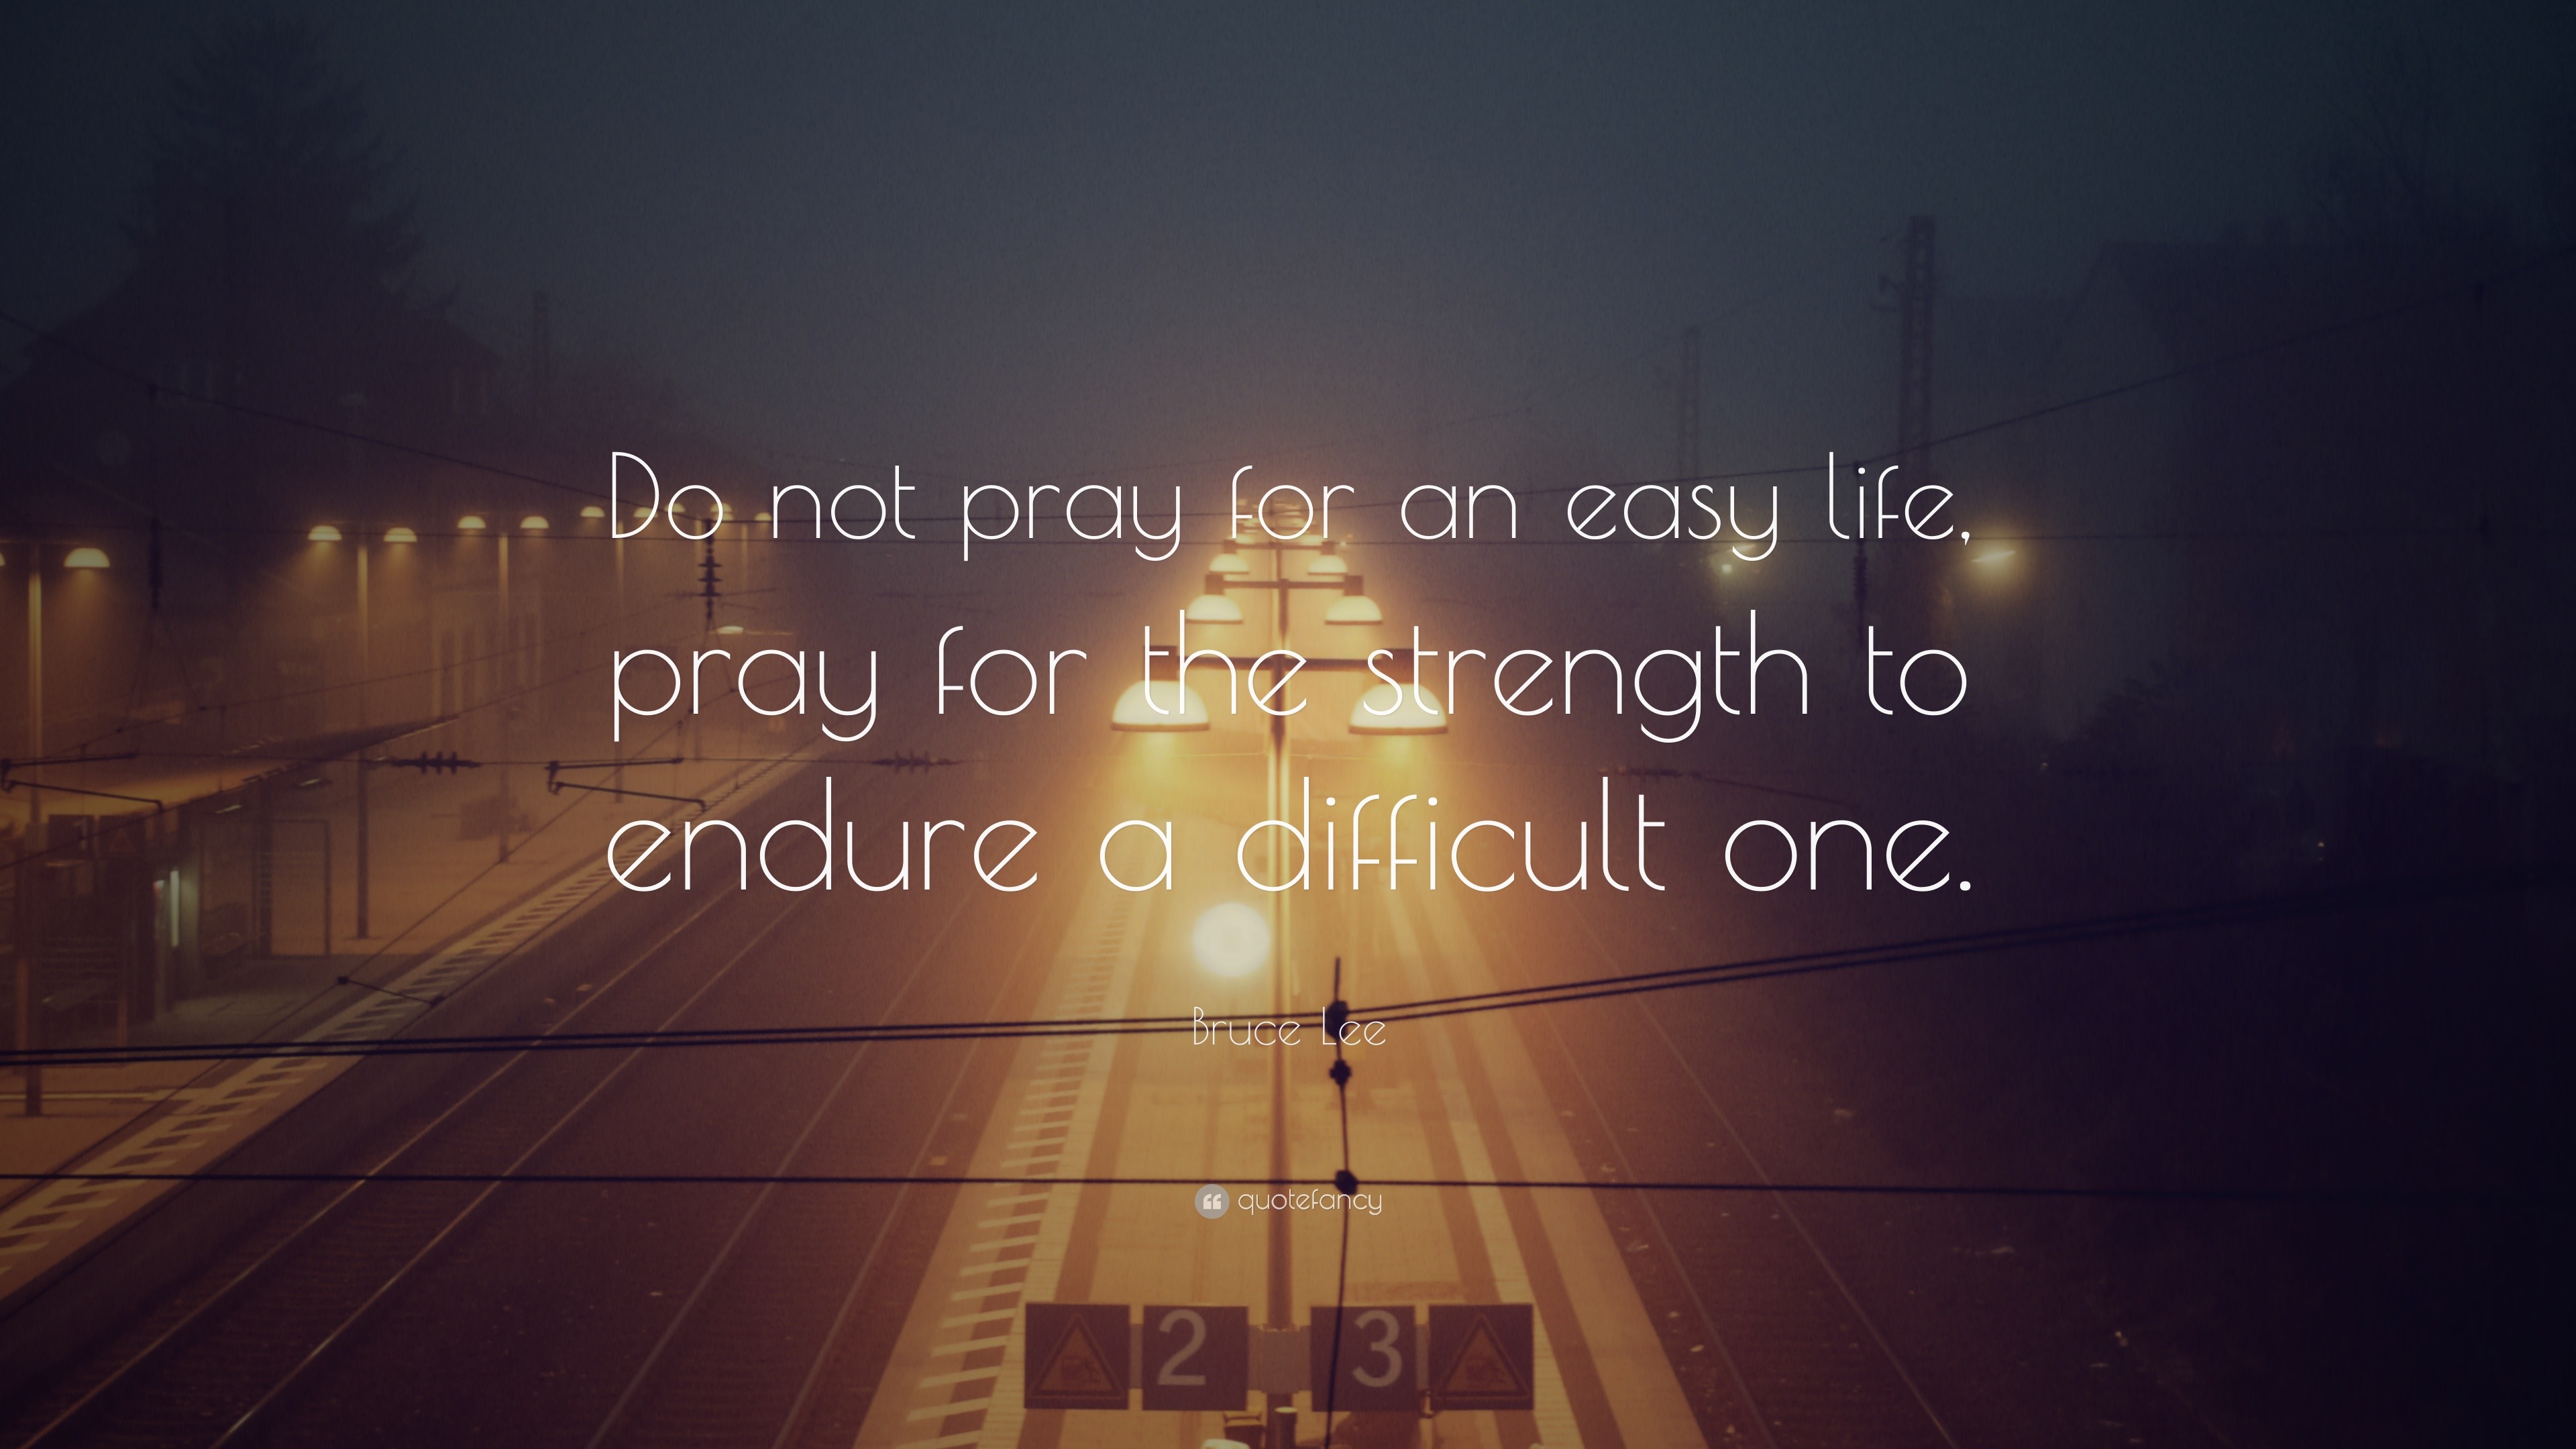 Bruce Lee Quote: “Do not pray for an easy life, pray for the strength